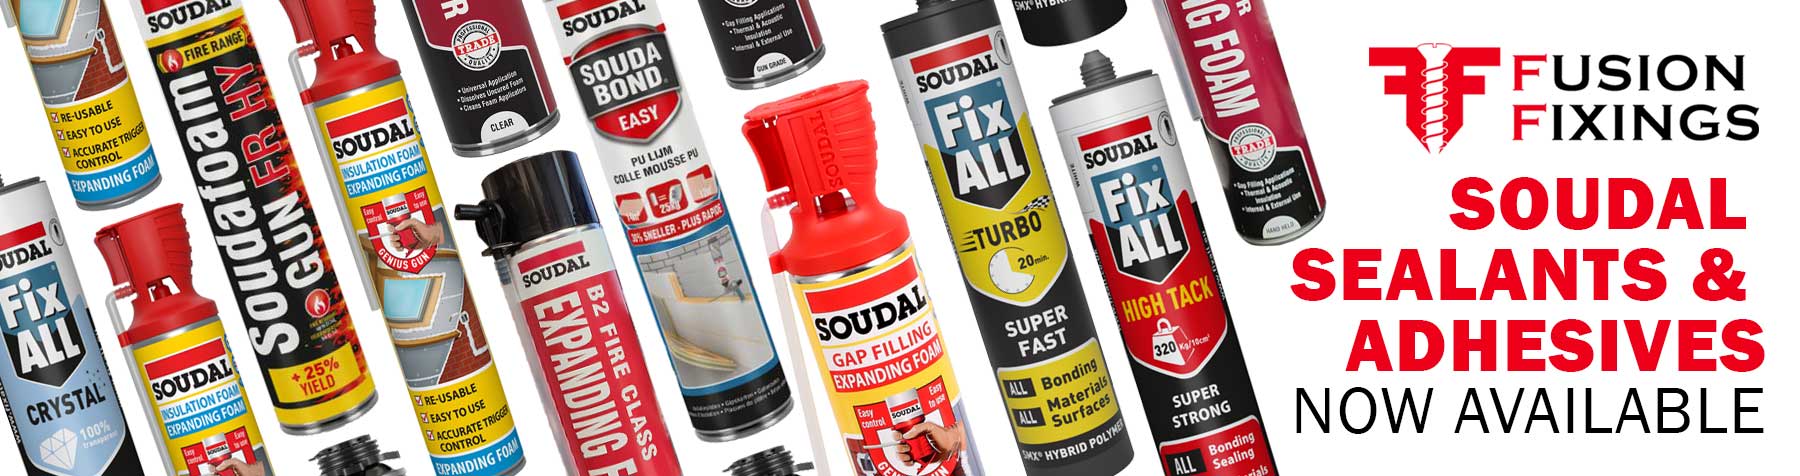 Soudal sealants and adhesives from Fusion Fixings